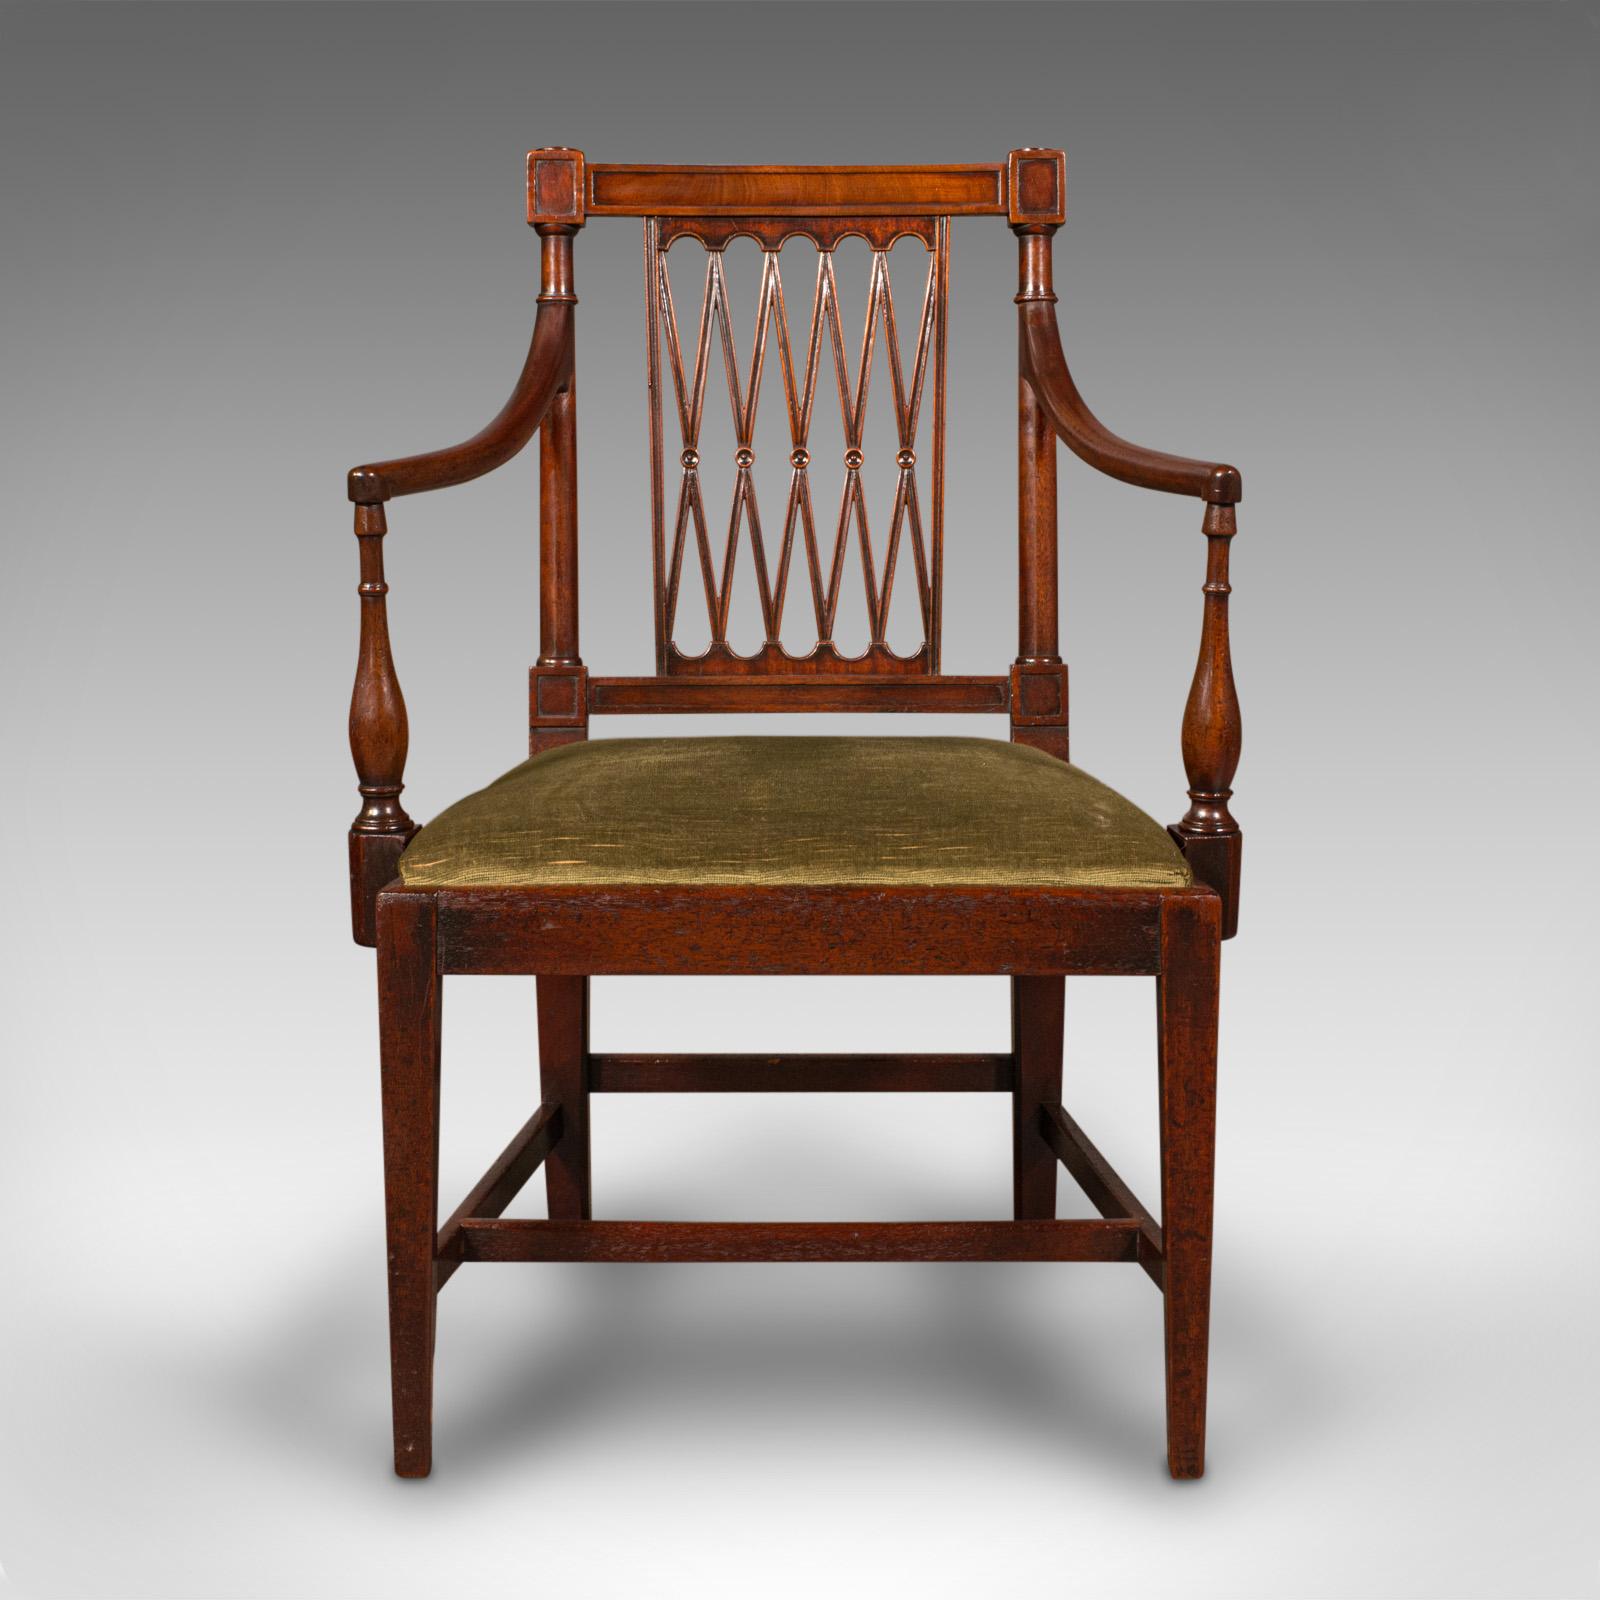 This is an antique elbow chair. An English, mahogany carver seat with Sheraton taste, dating to the Georgian period, circa 1780.

Wonderfully distinctive elbow chair with a superb back rest
Displays a desirable aged patina and in very good